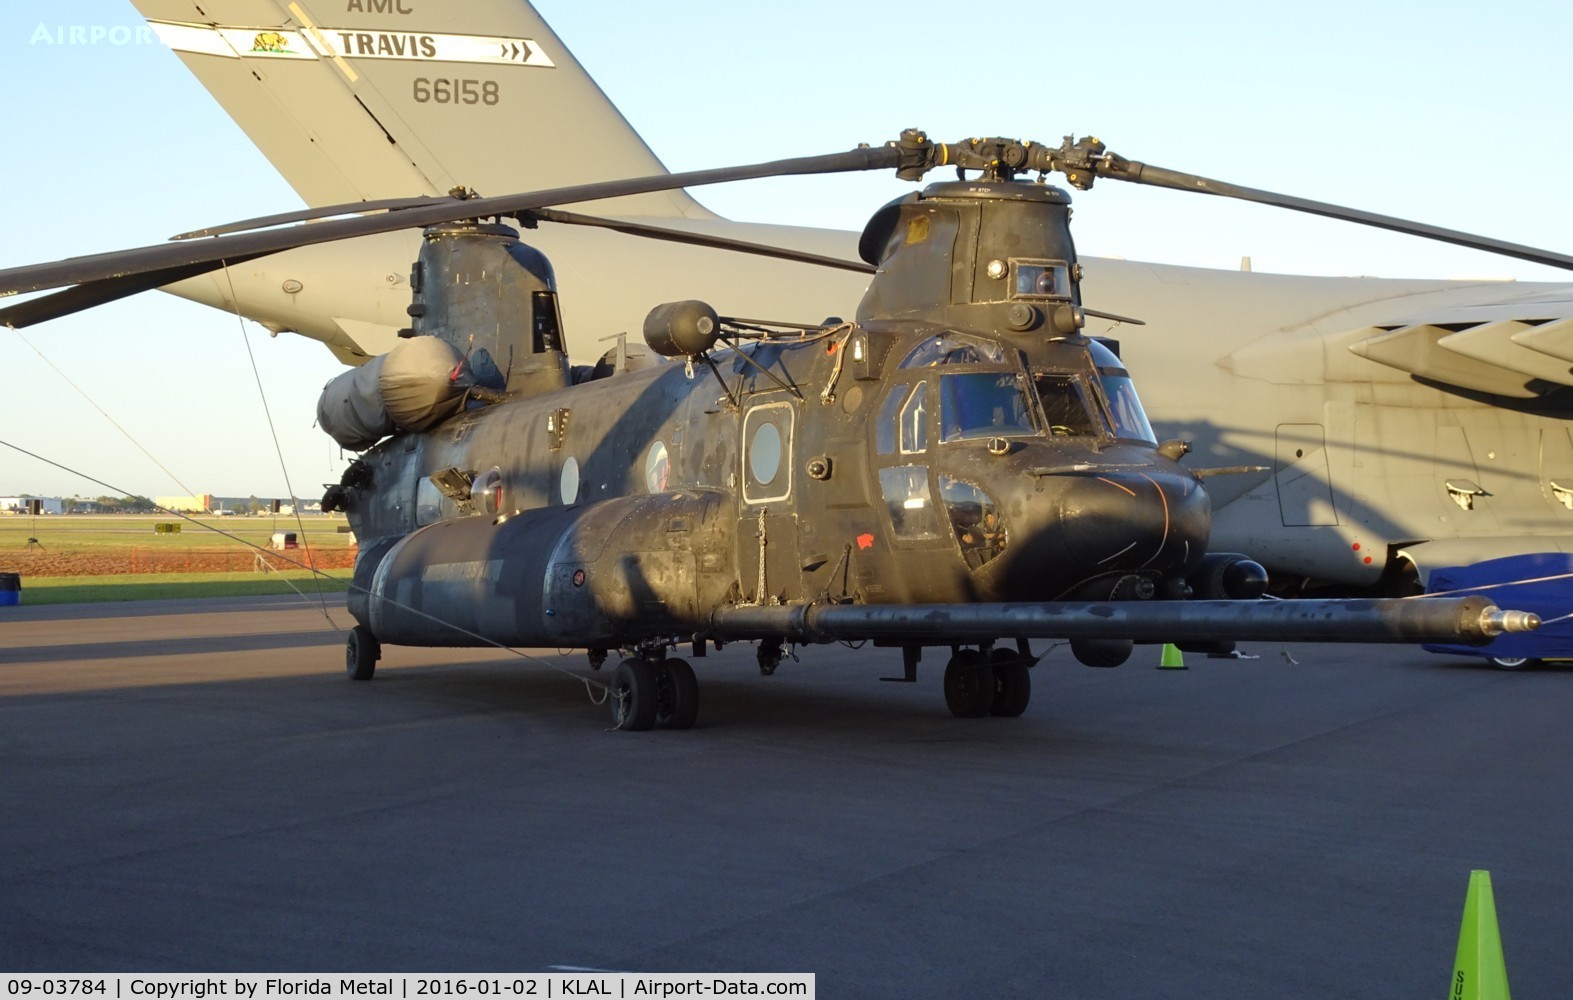 09-03784, 2009 Boeing MH-47G Chinook C/N M3784, MH-47G